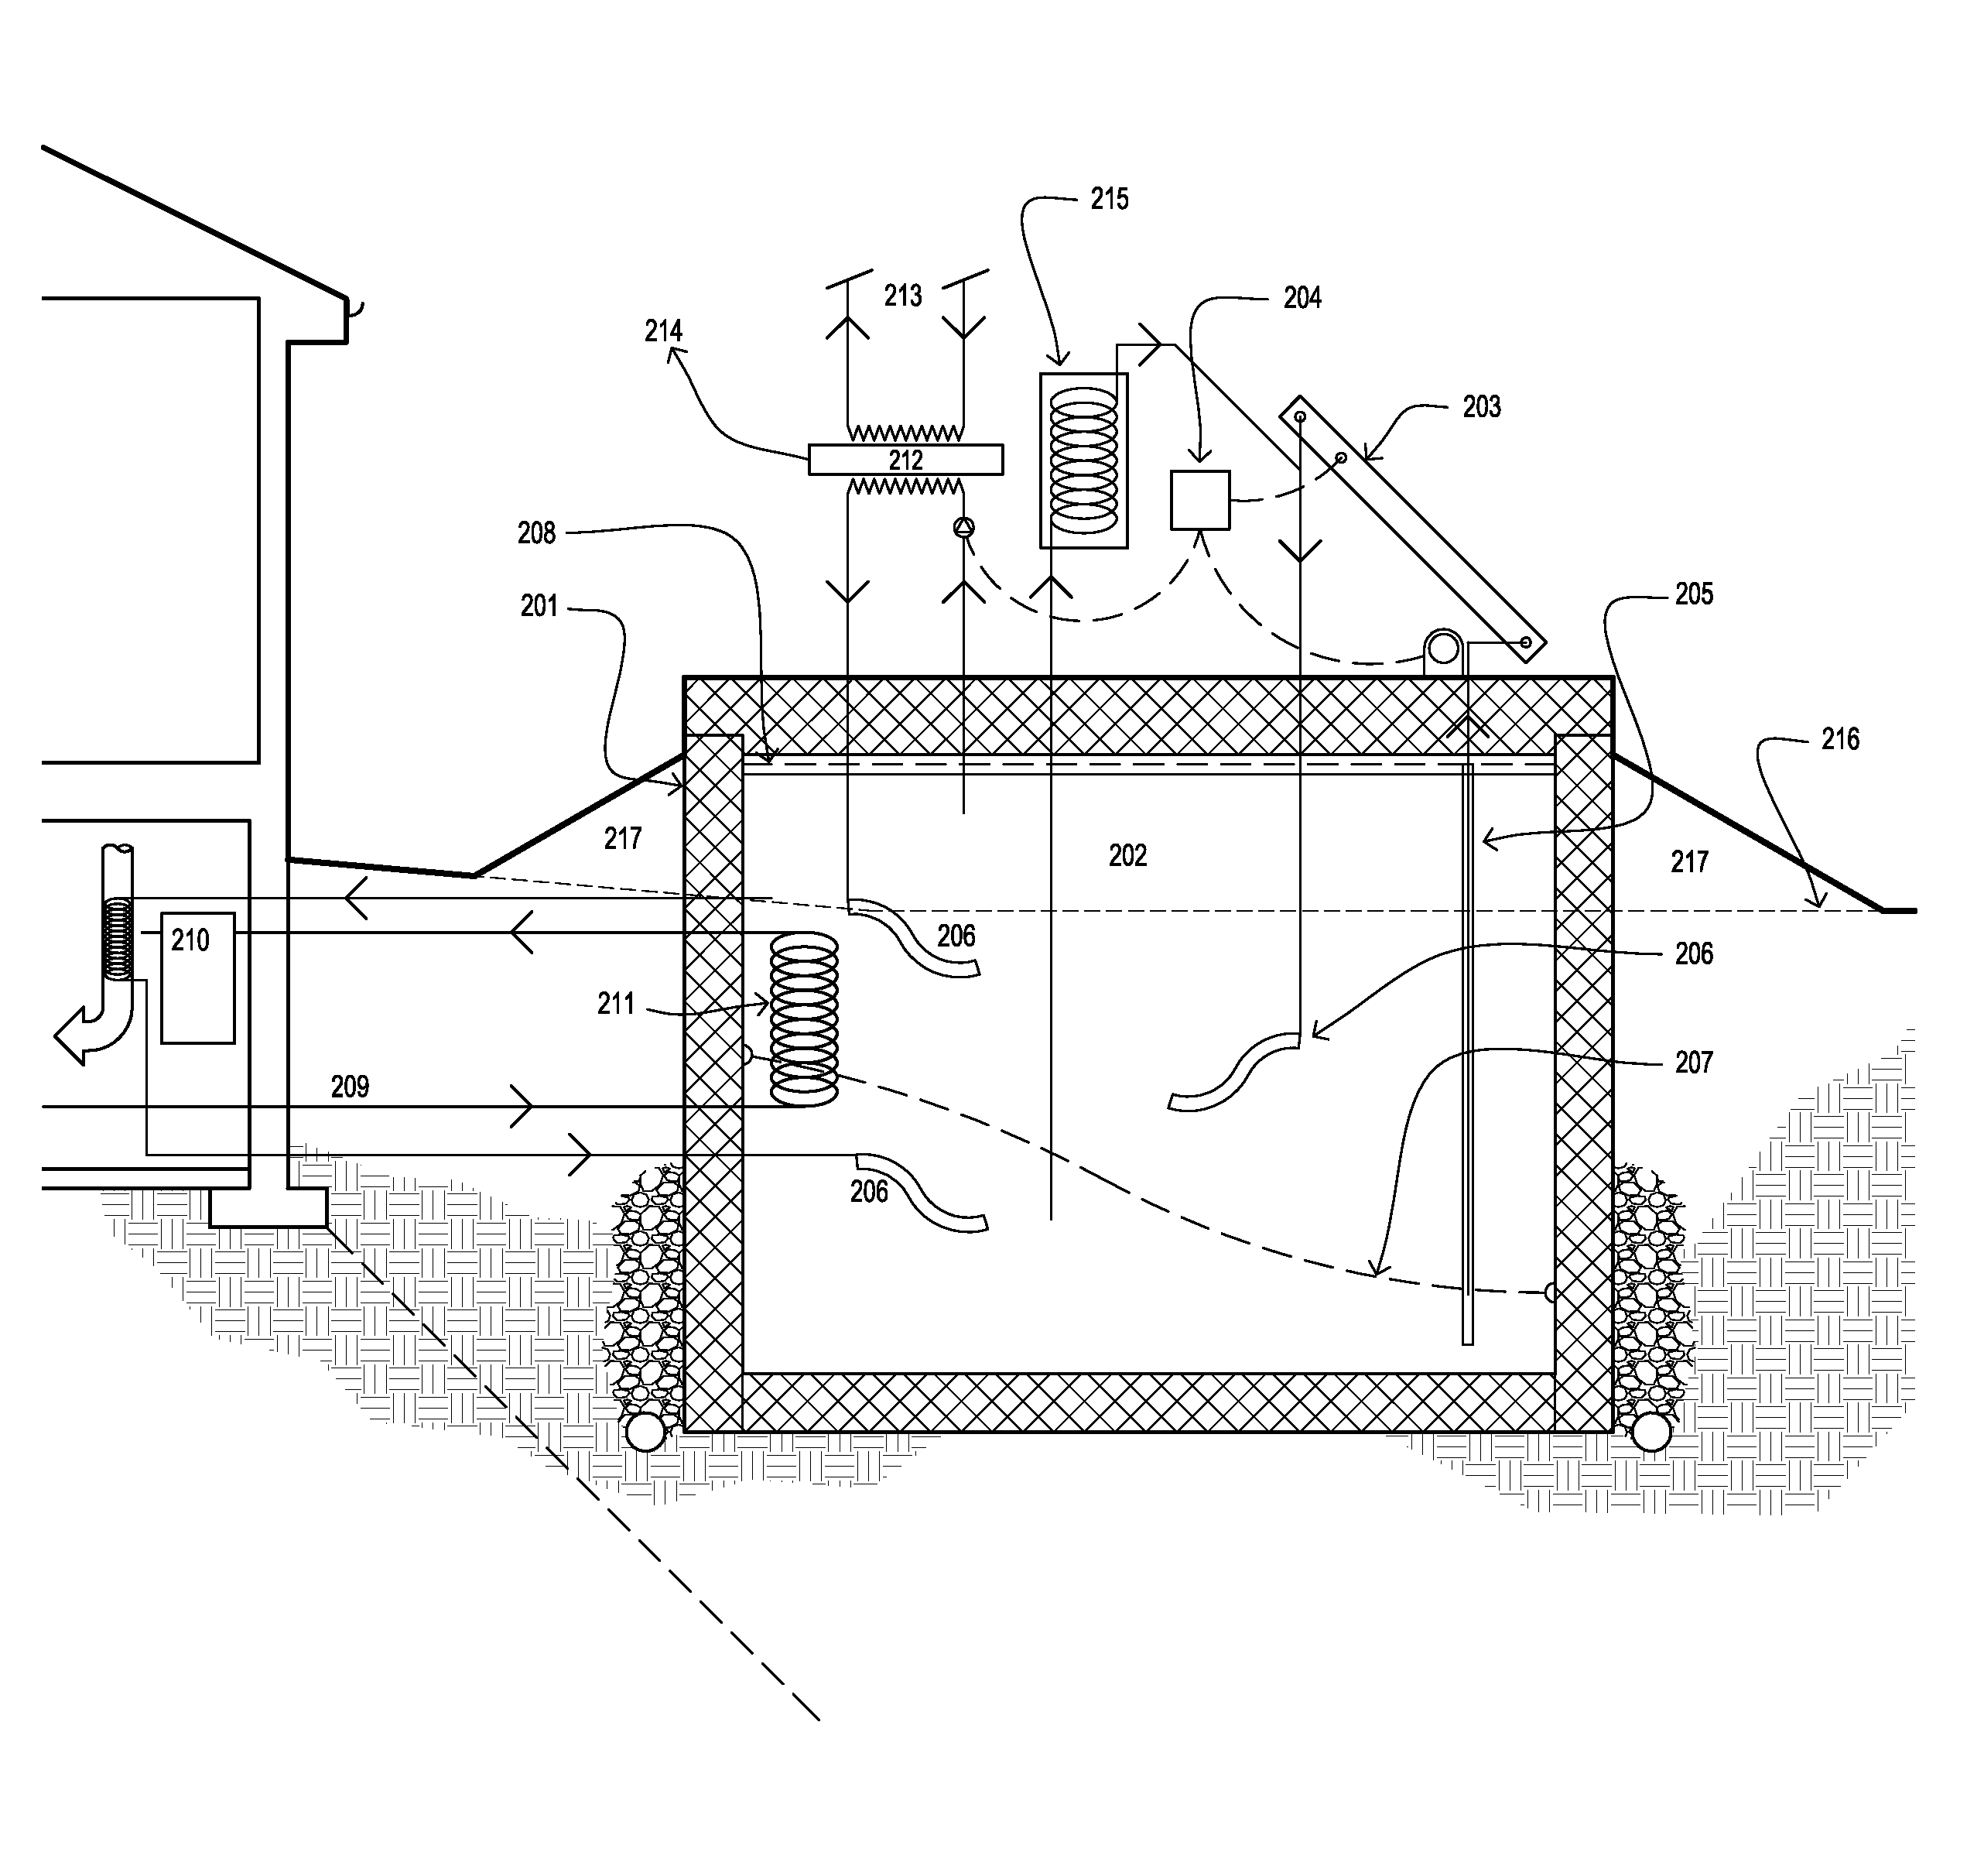 Methods and apparatus for creating large energy storage mass through the collection and use of warmed water